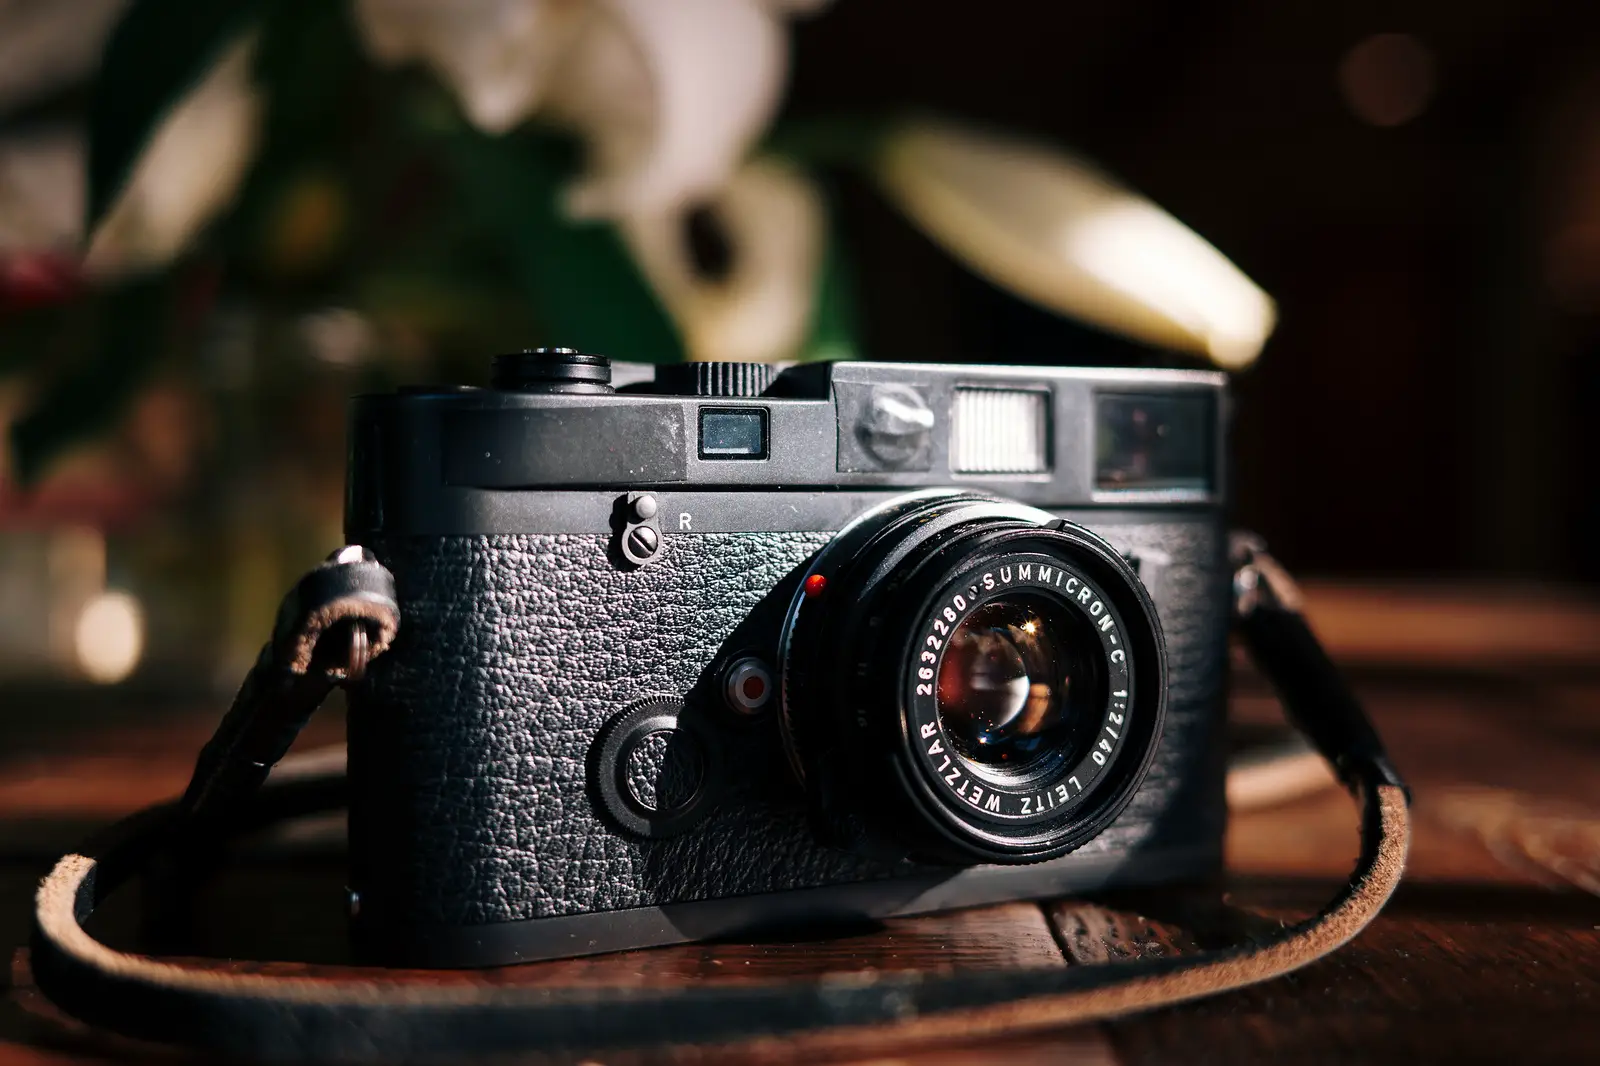 Leica M6 (yet another) Review - Is it worth the hype? - By Joe Monat - 35mmc